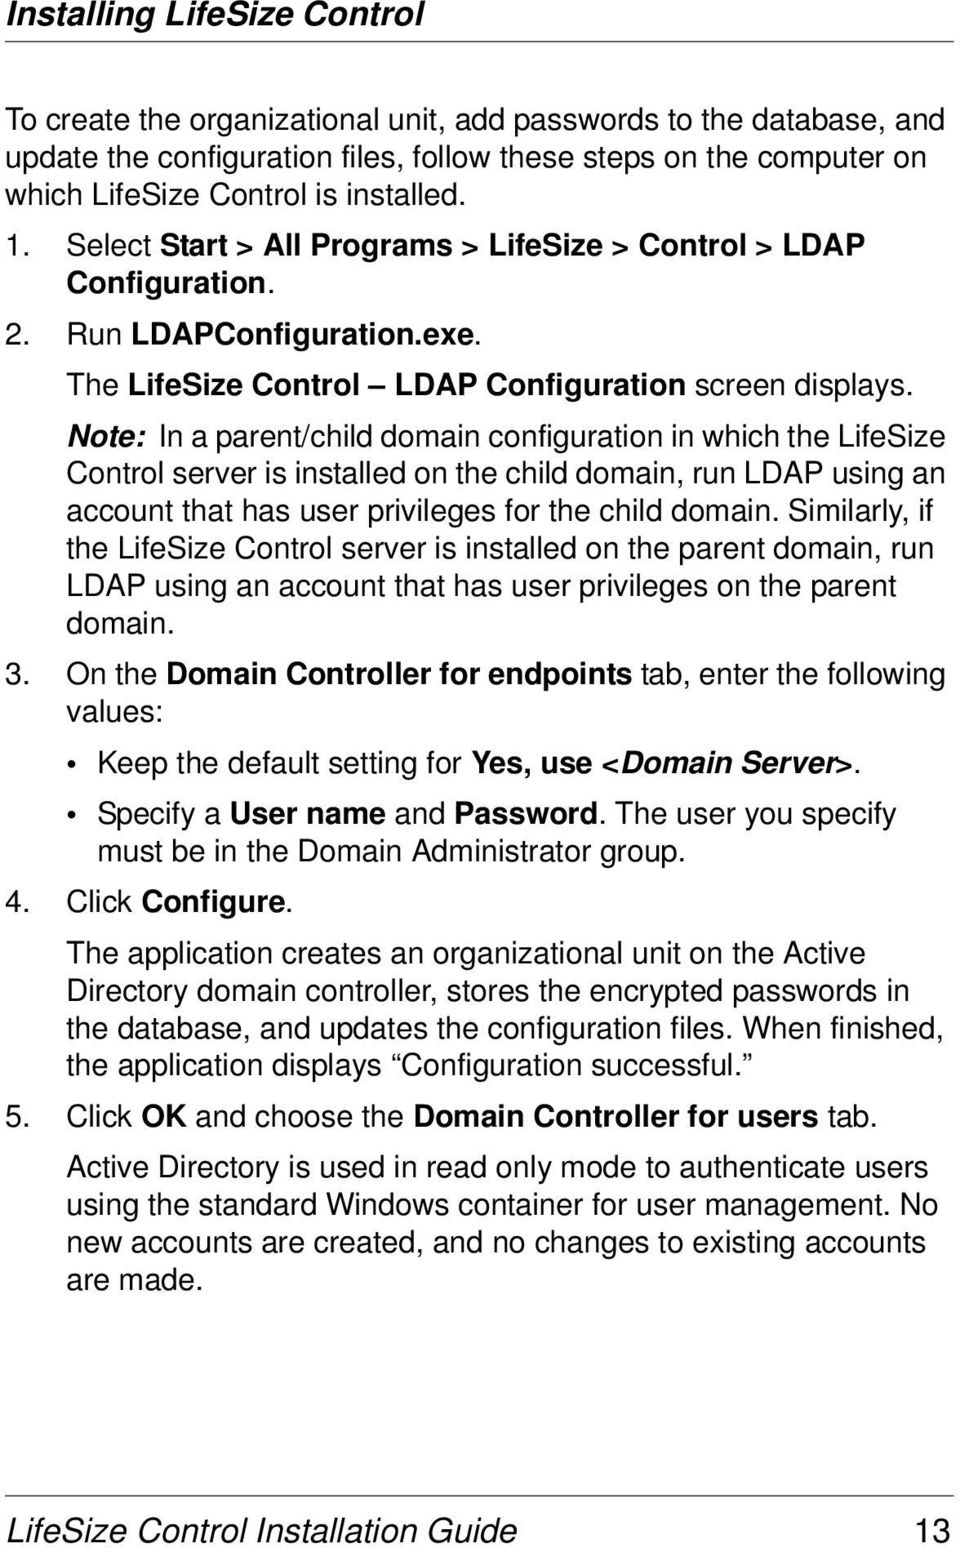 Note: In a parent/child domain configuration in which the LifeSize Control server is installed on the child domain, run LDAP using an account that has user privileges for the child domain.